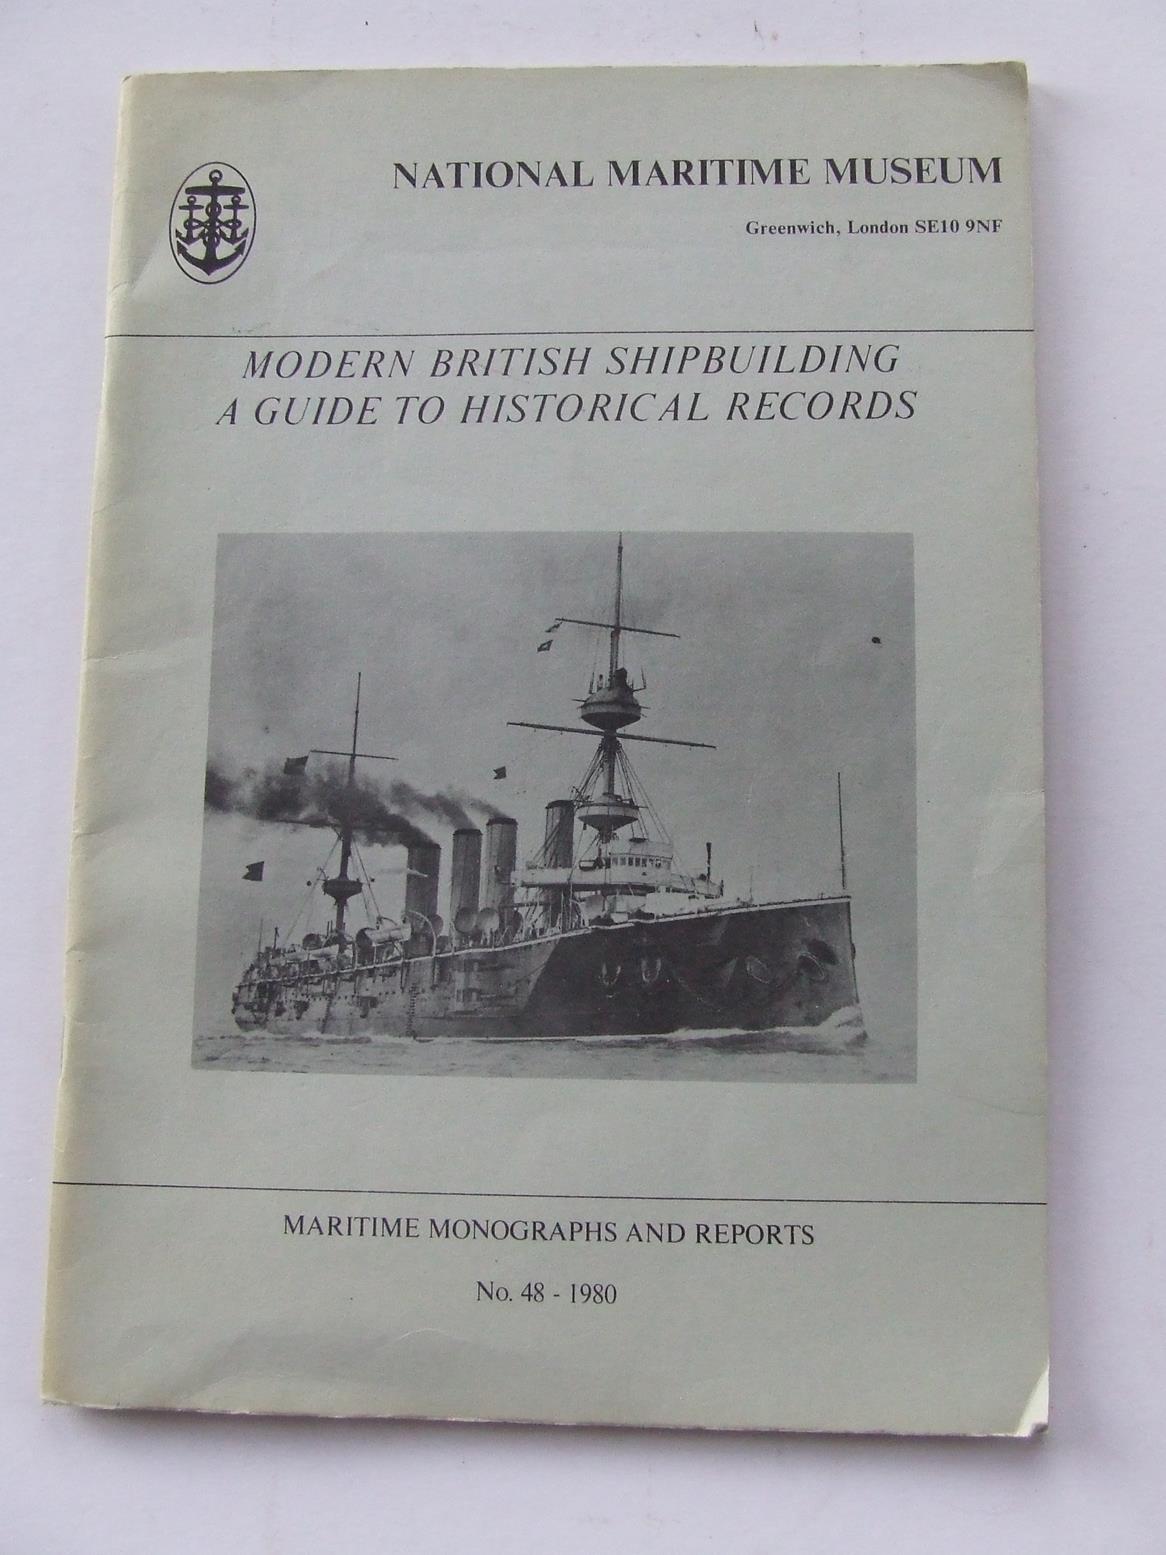 Modern British Shipbuilding, a guide to historical records